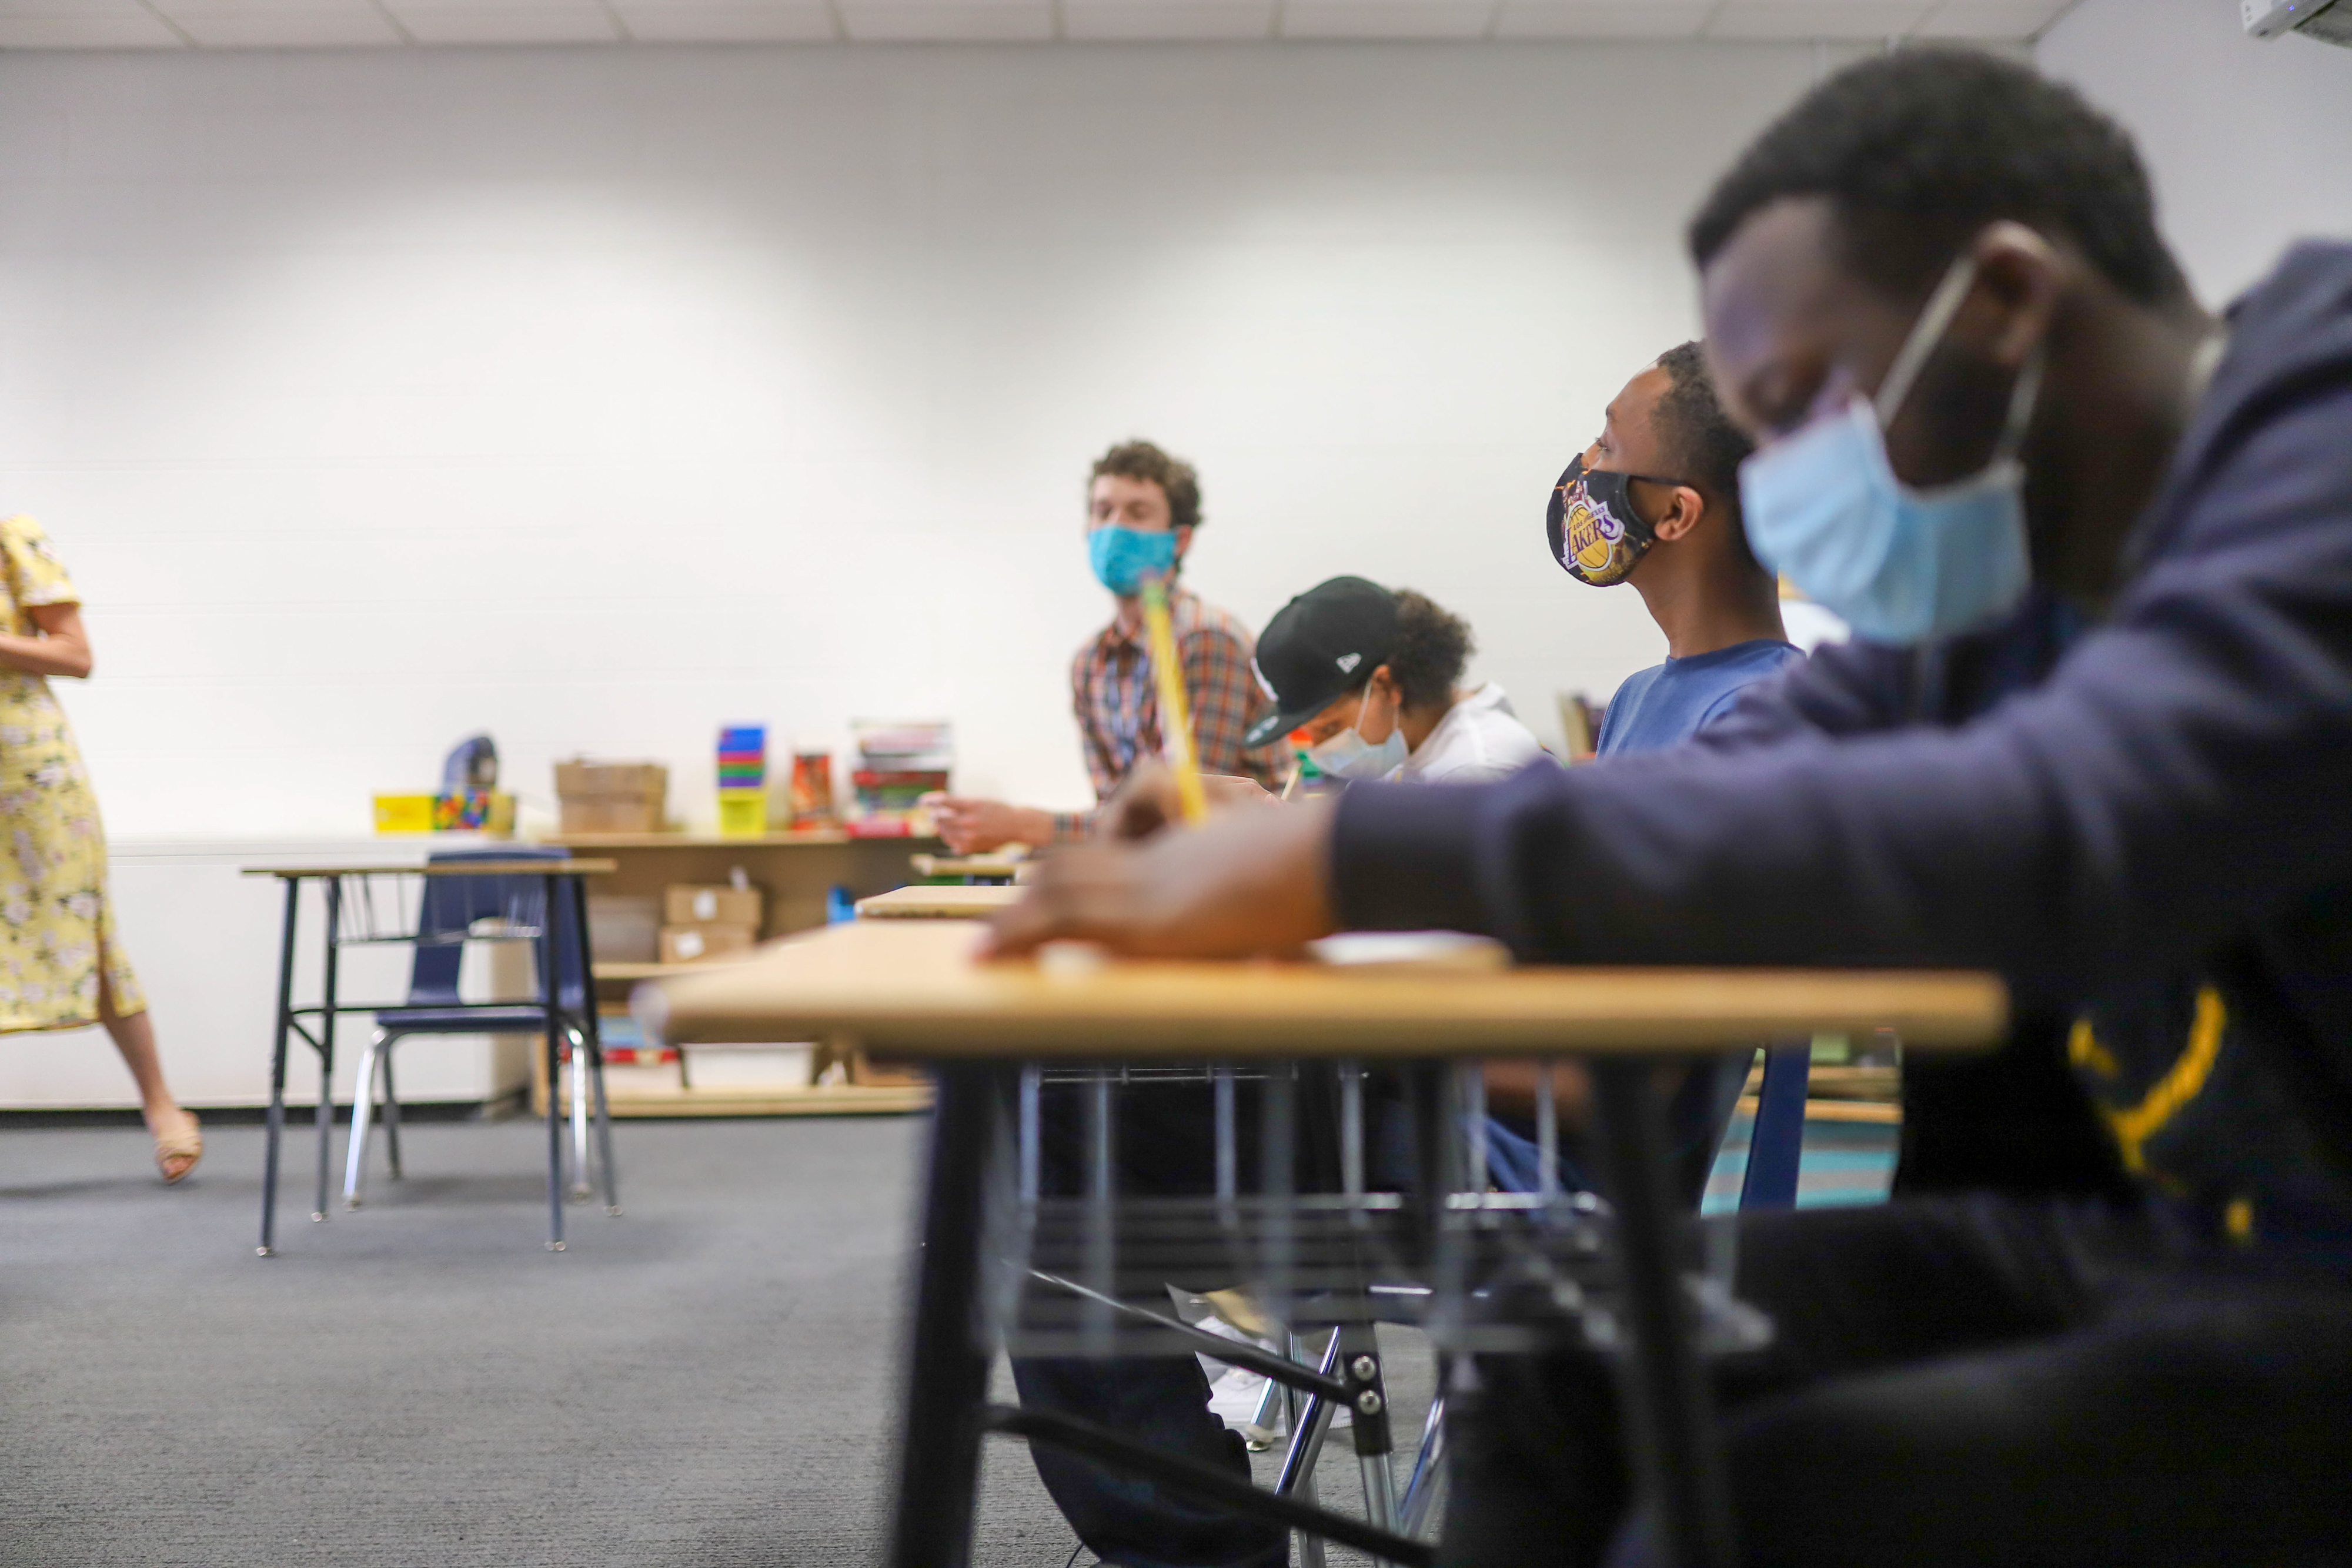 Four students wearing masks work at their desks in a classroom.